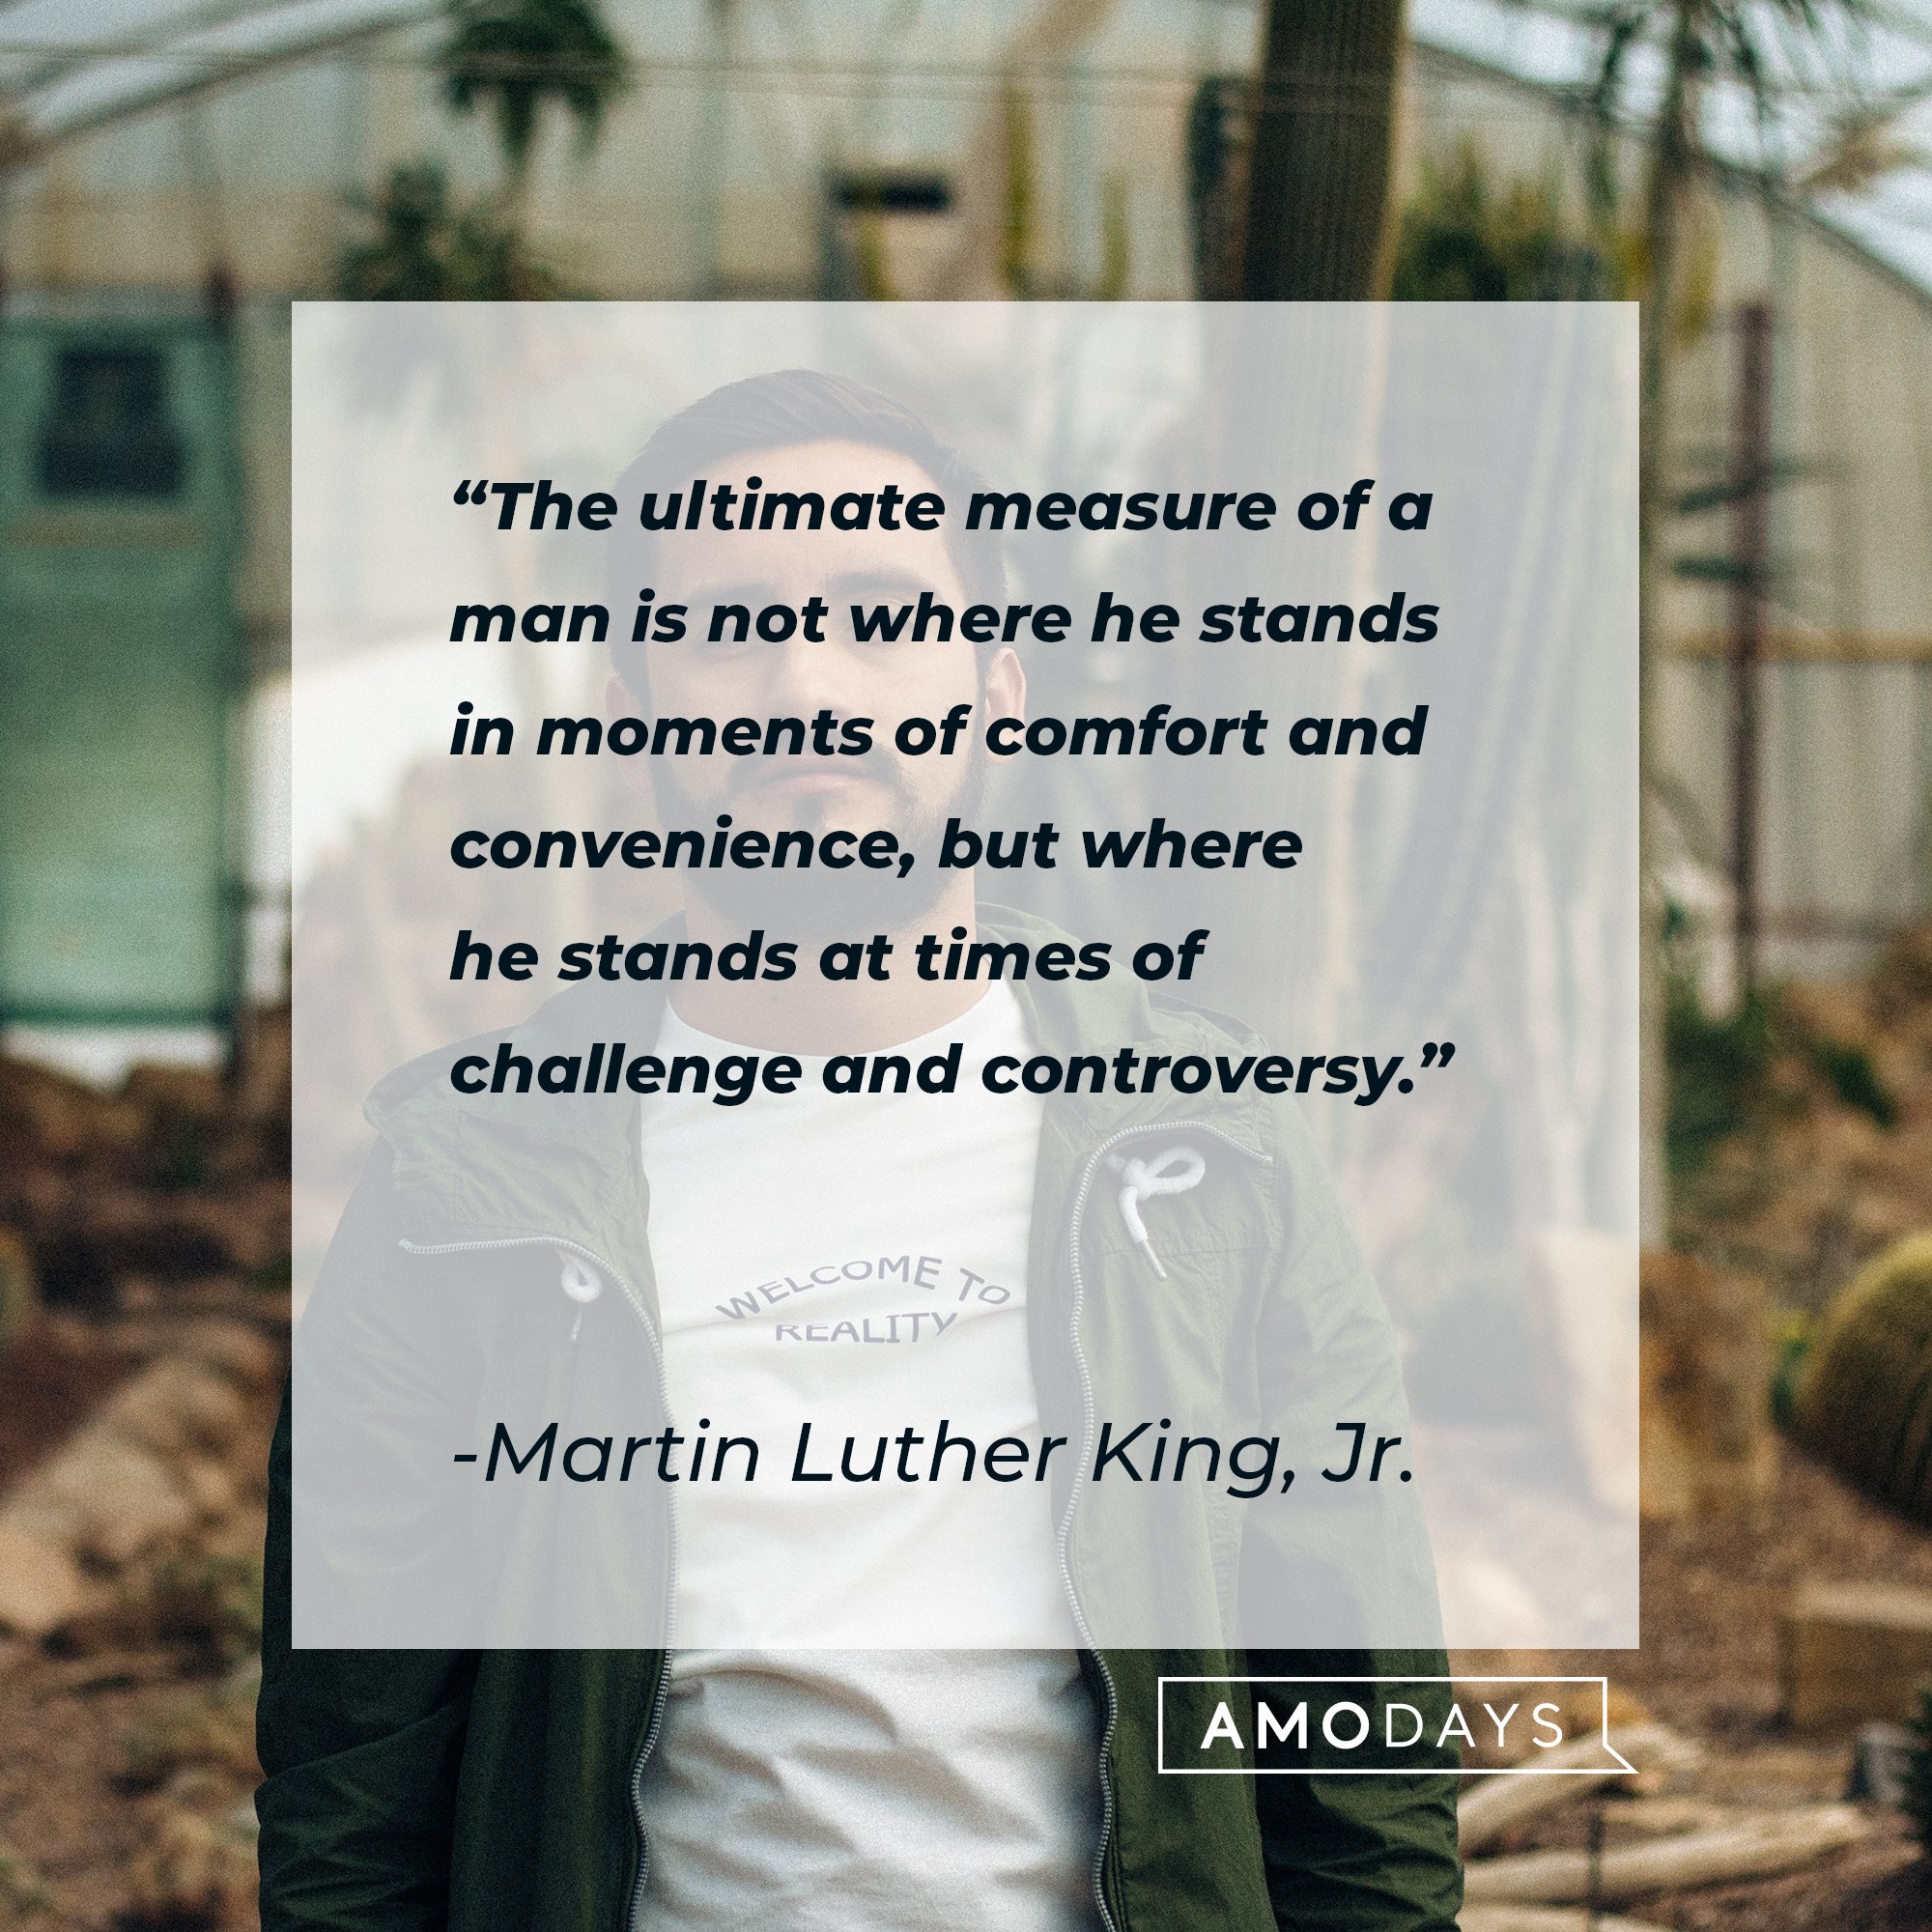 Martin Luther King, Jr.’s quote: "The ultimate measure of a man is not where he stands in moments of comfort and convenience, but where he stands at times of challenge and controversy." | Image: AmoDays